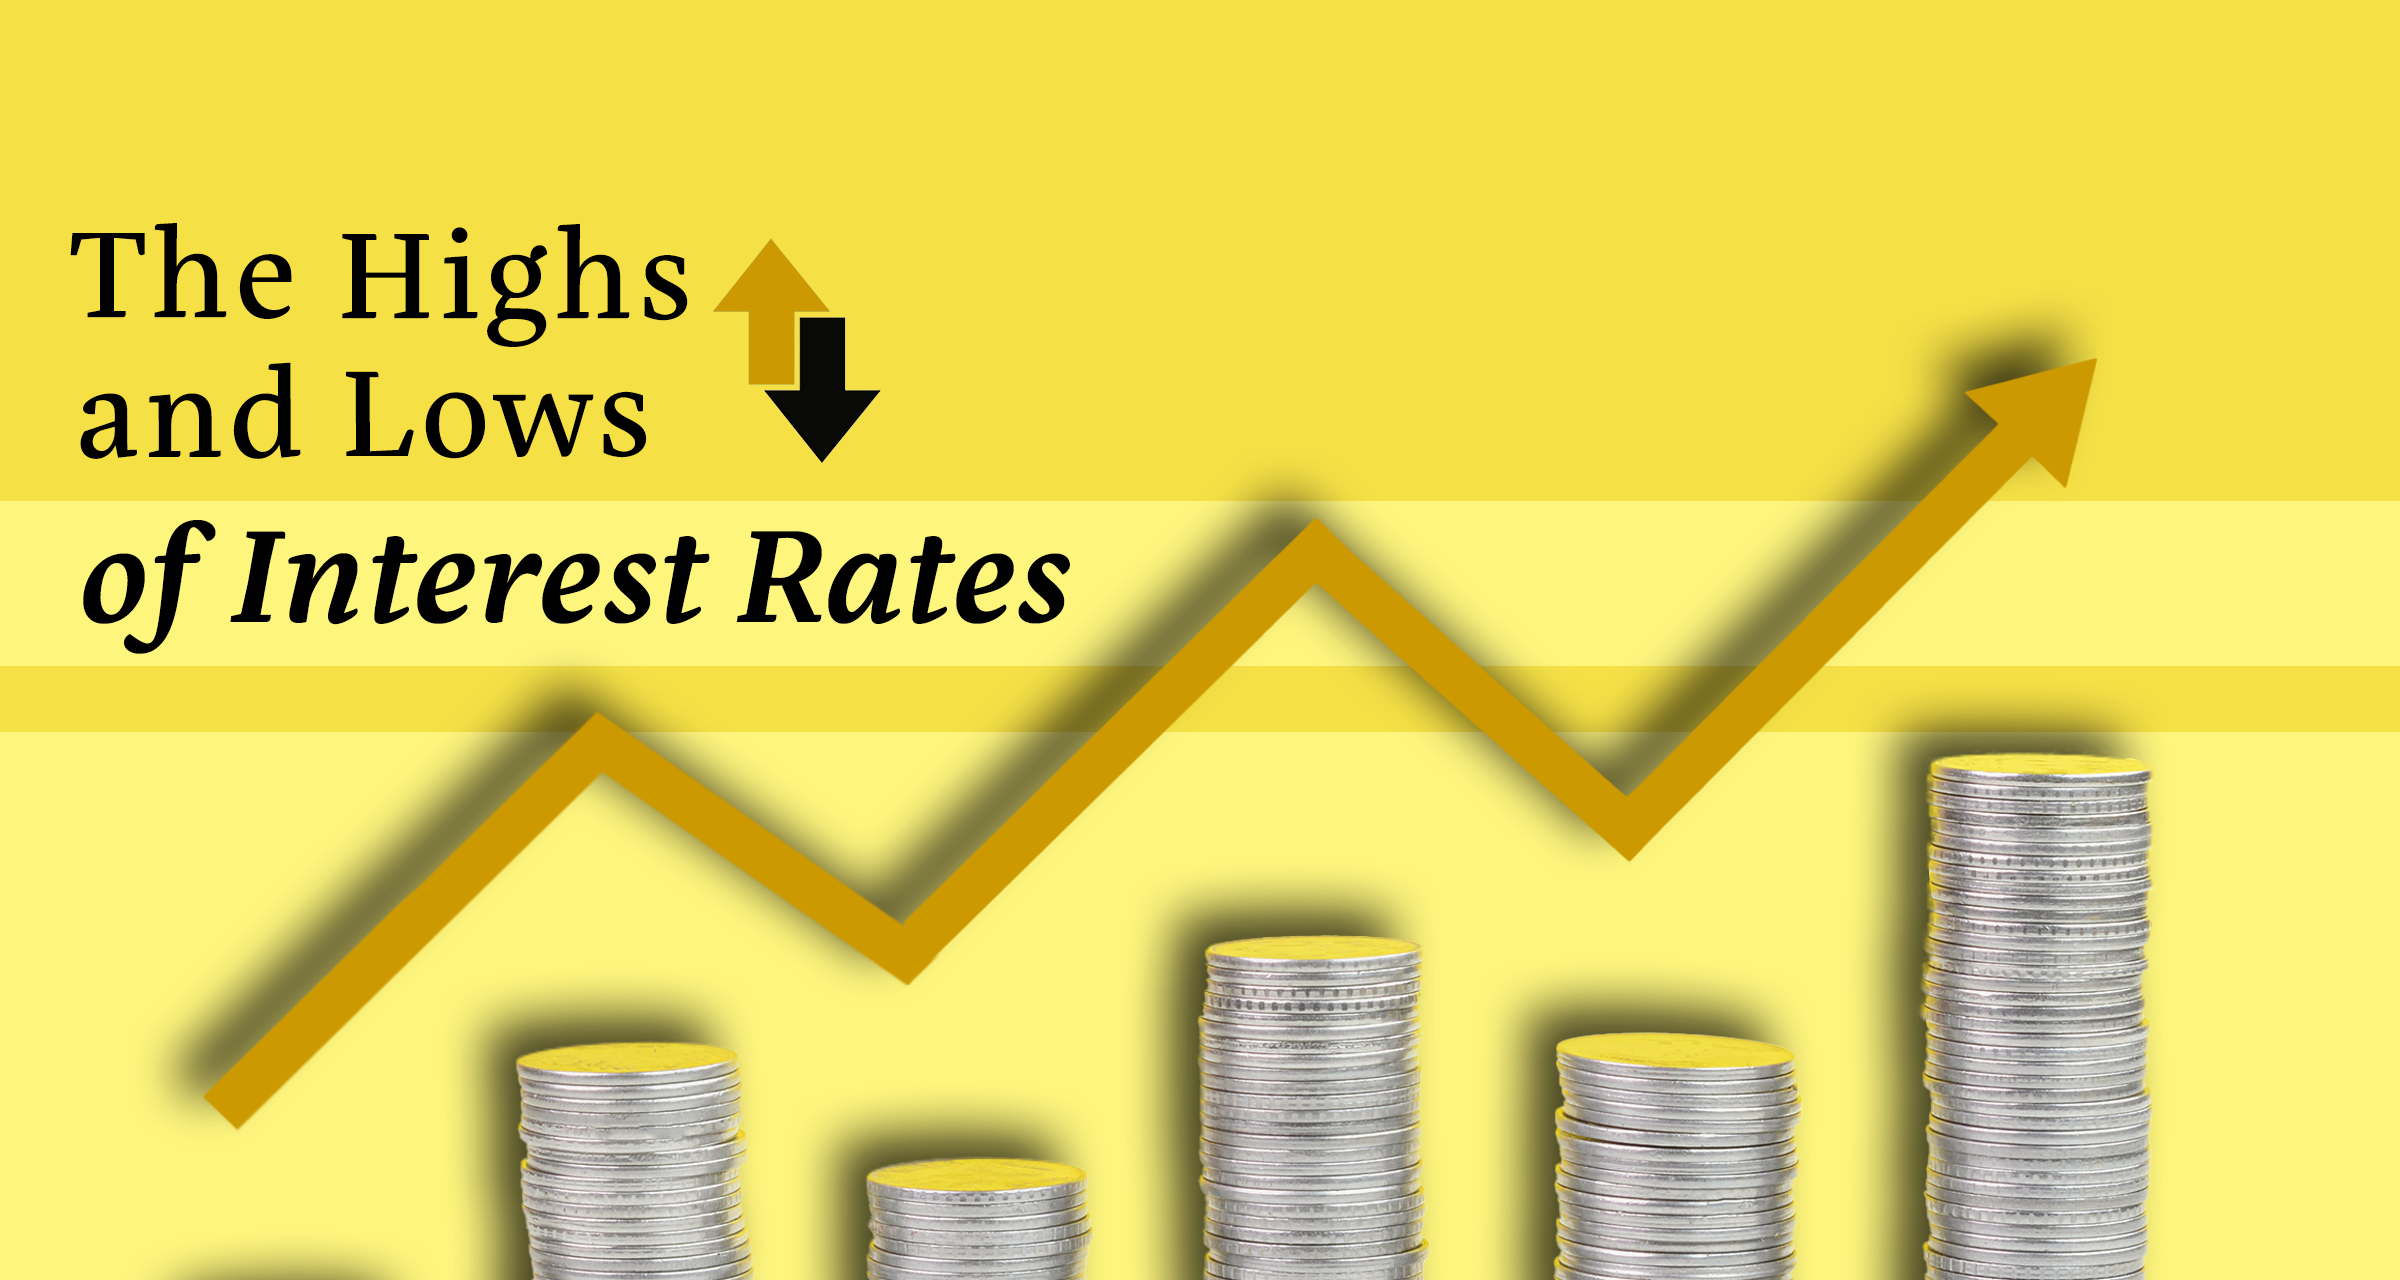 The Highs and Lows of Interest Rates